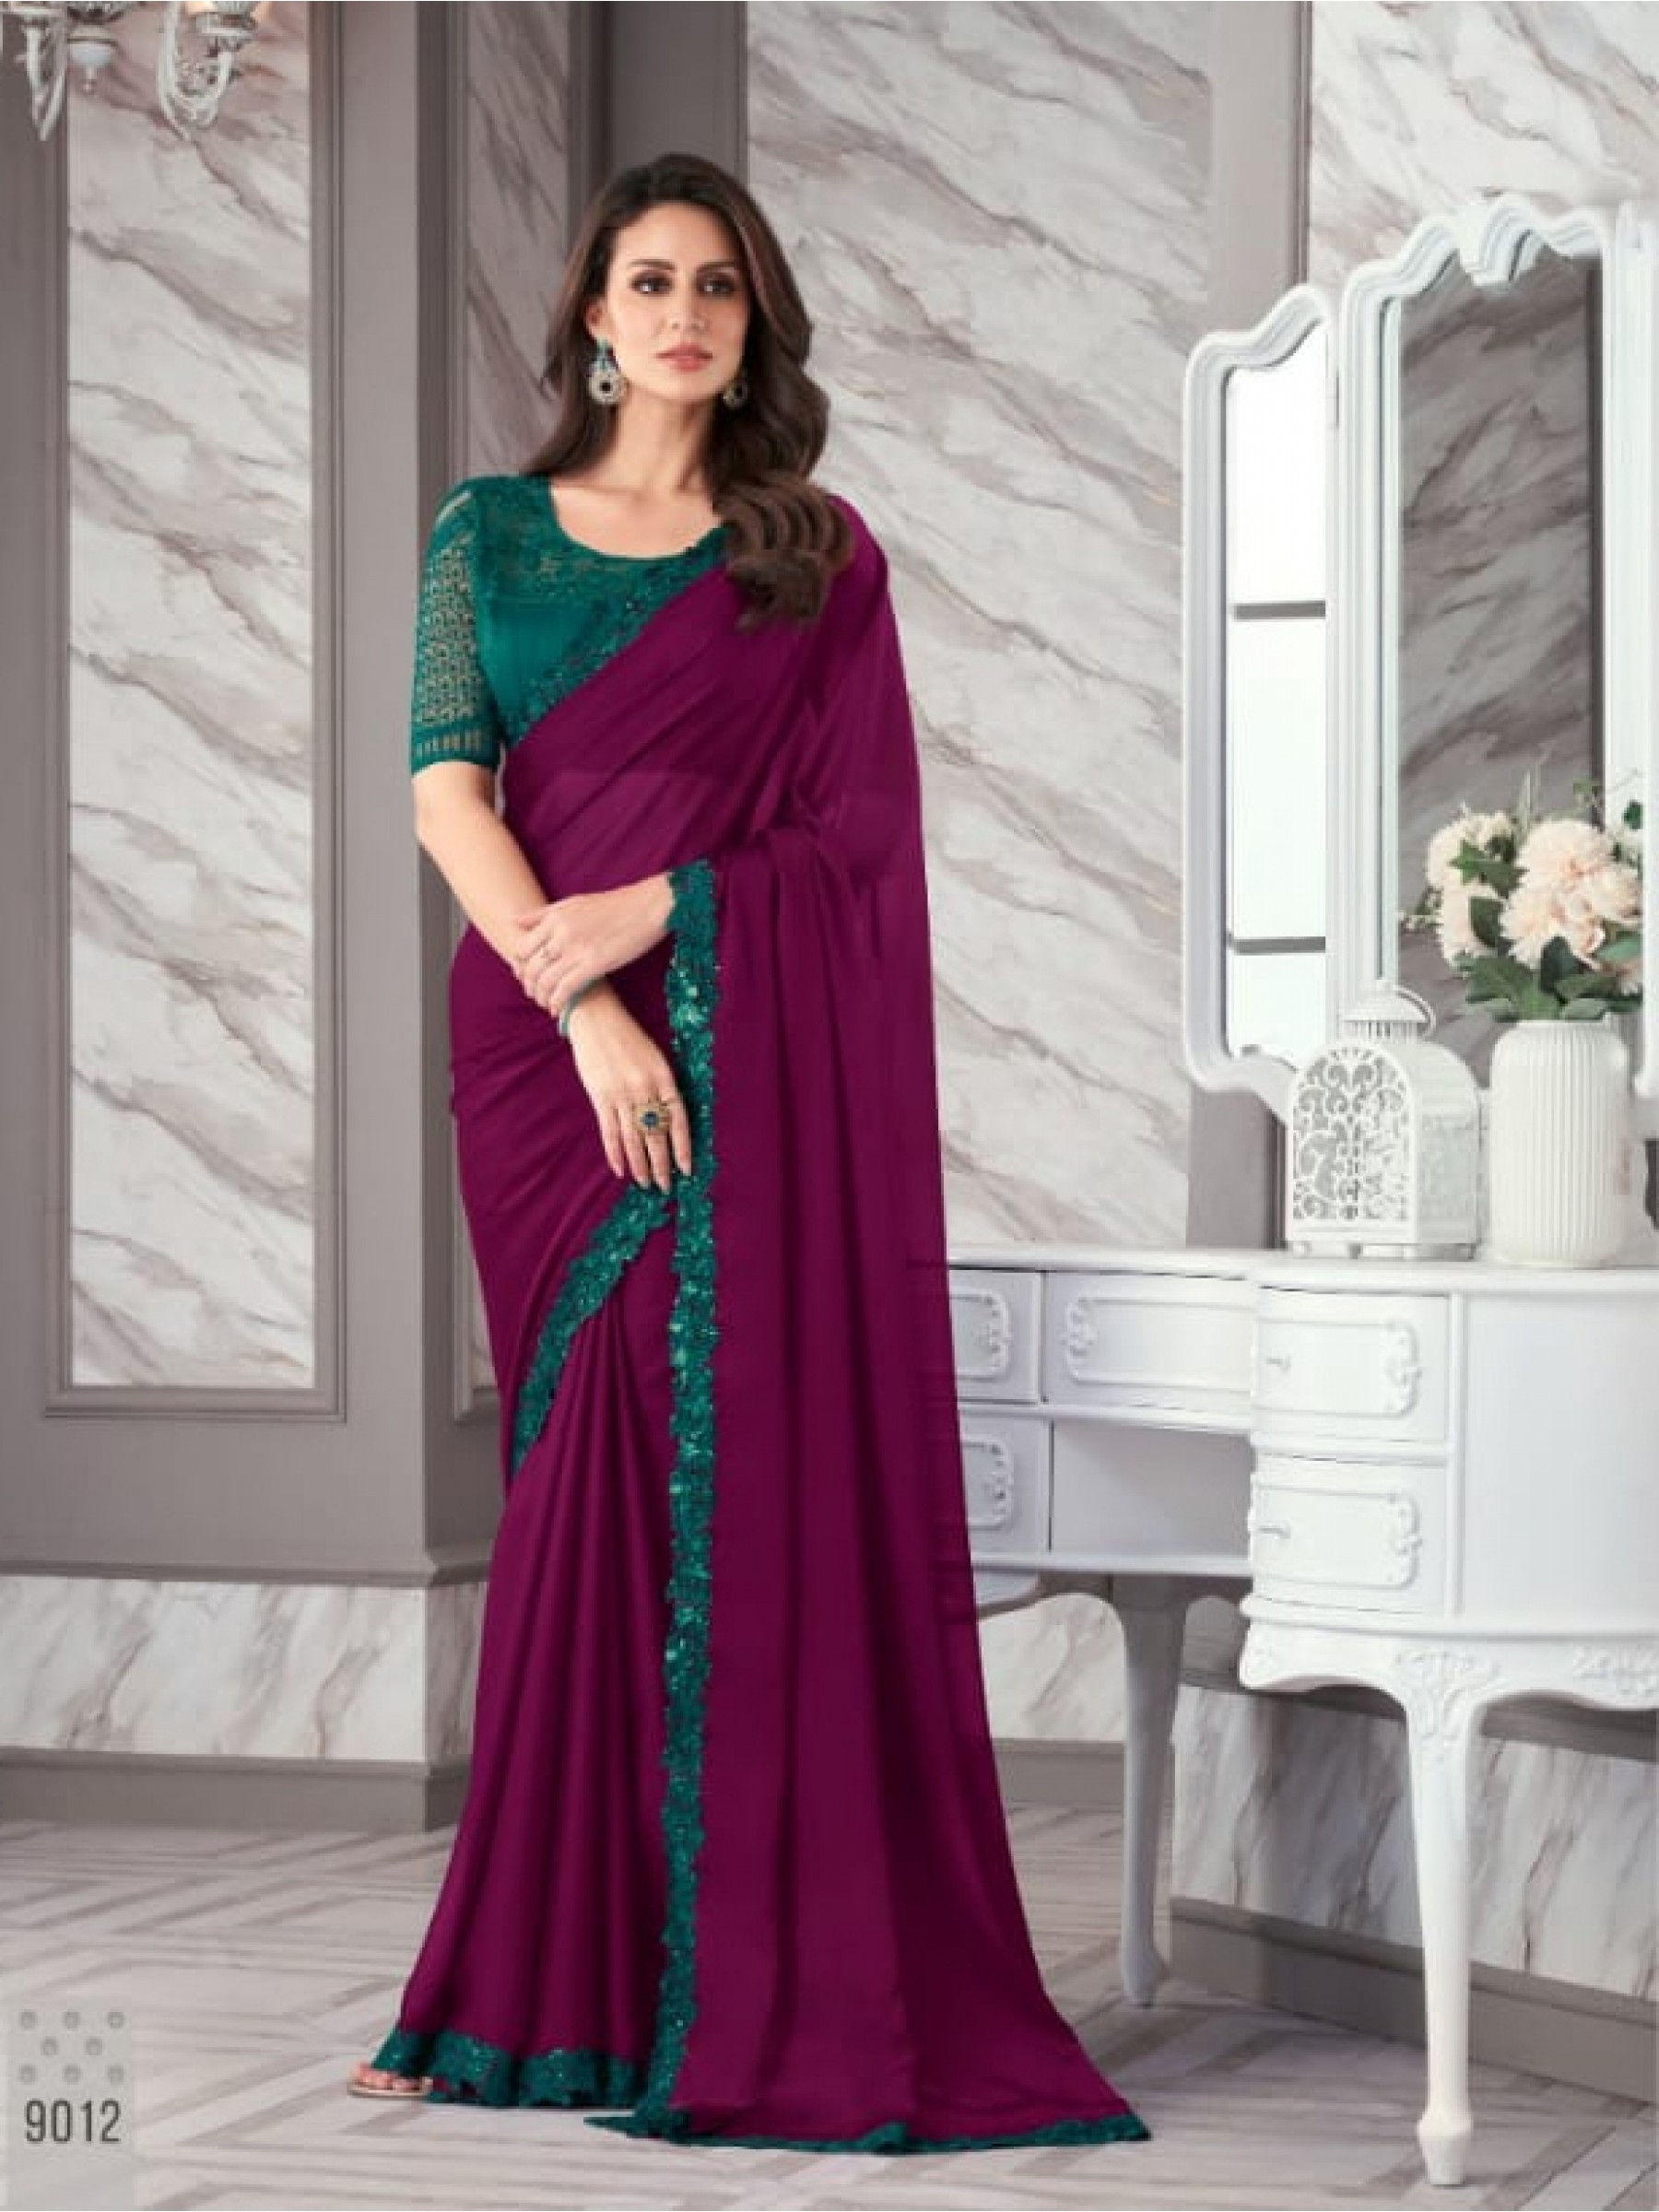  Georgette Party Wear  Saree In Purple Color With Embroidery Work